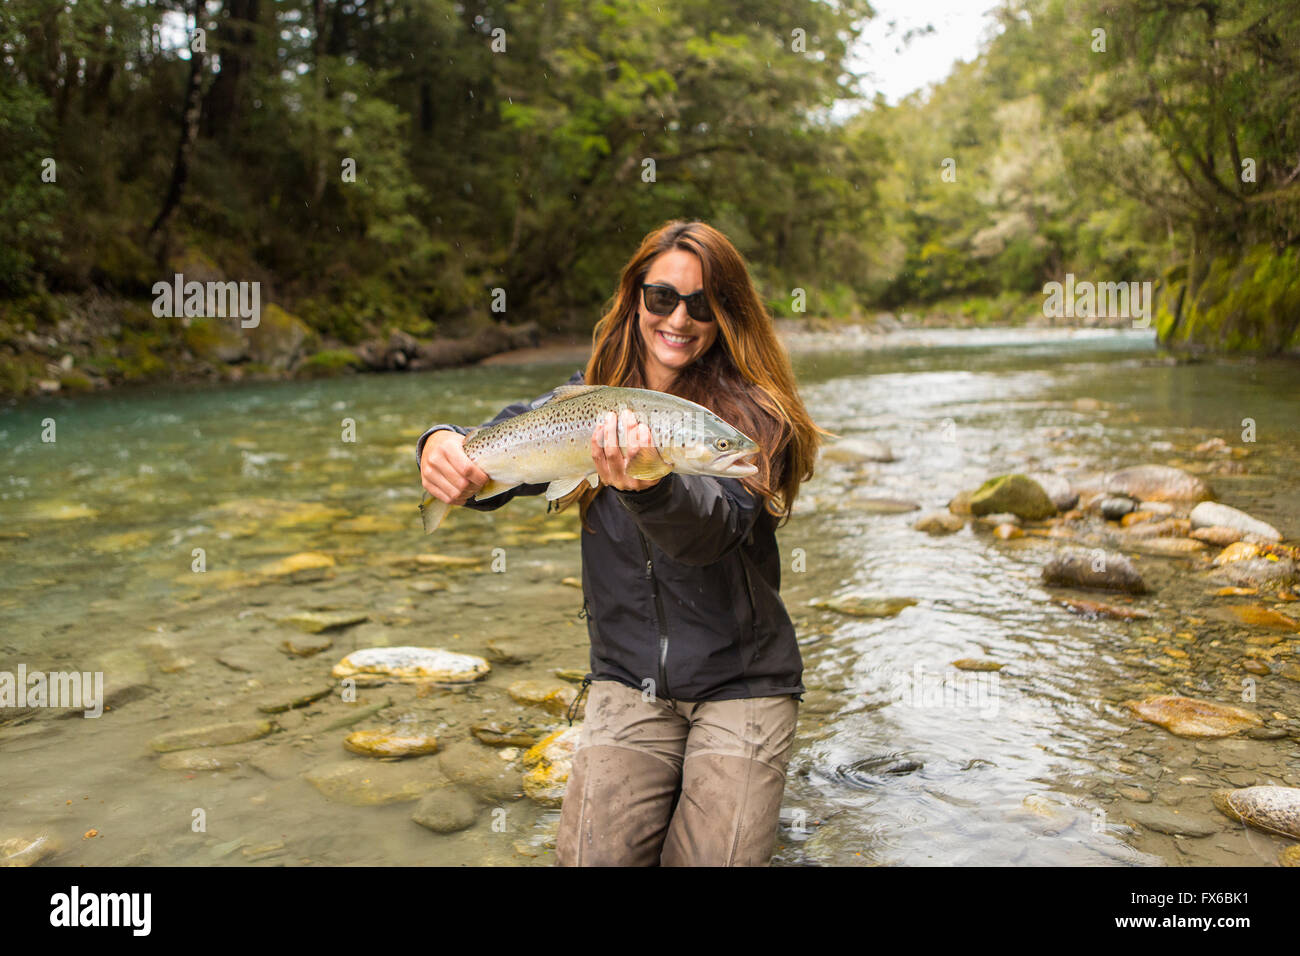 Caucasian woman catching fish in remote river Stock Photo - Alamy